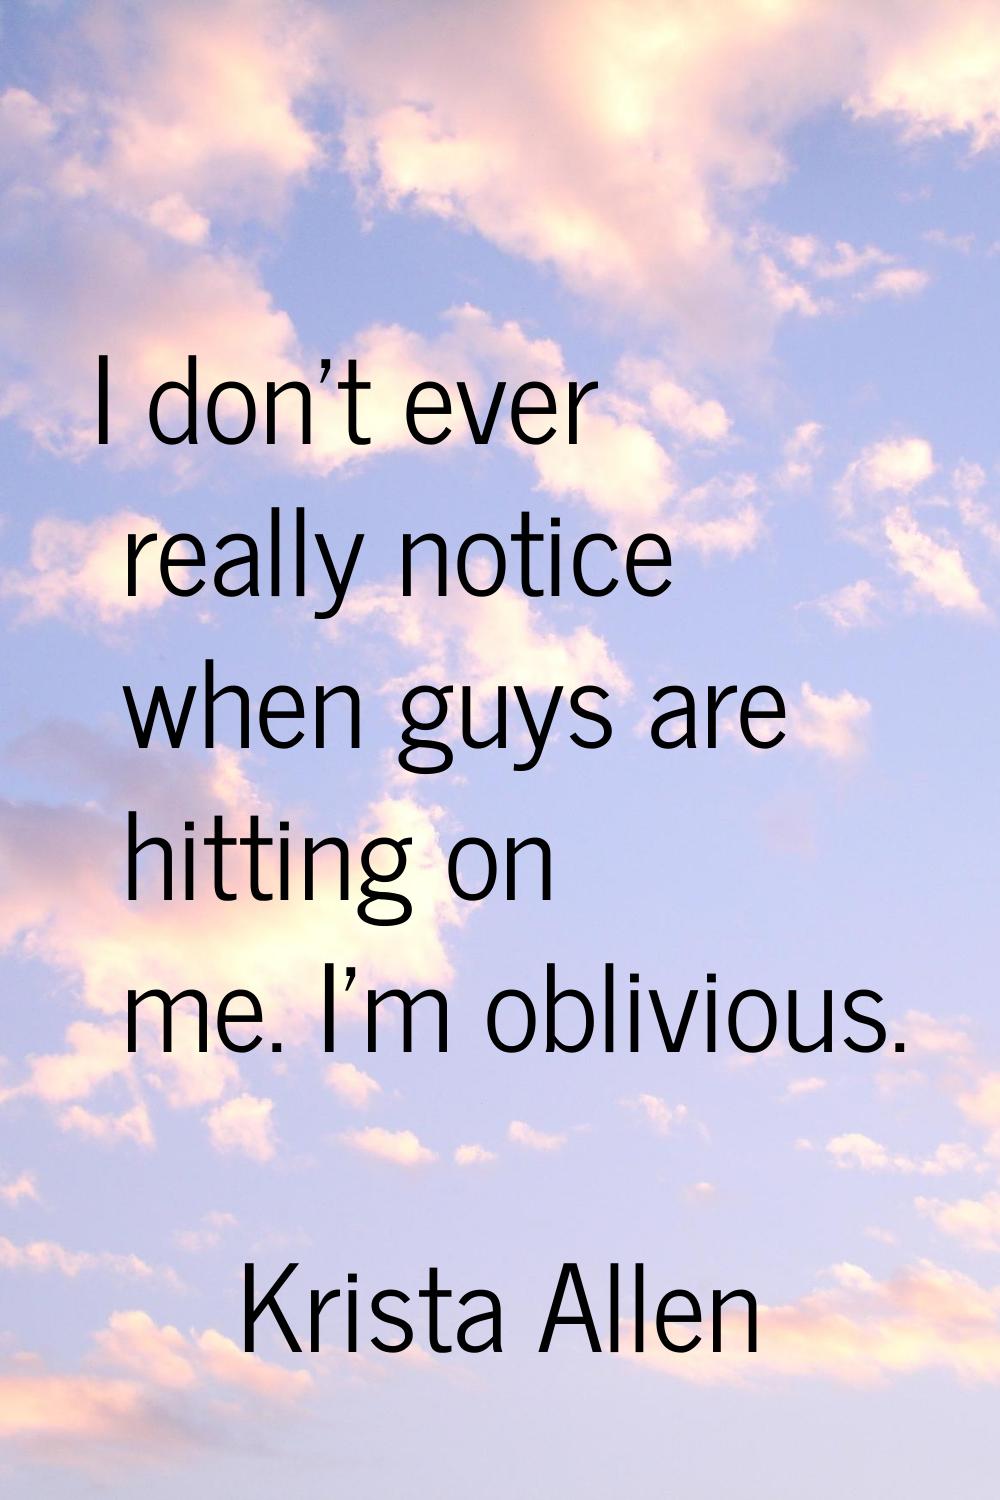 I don't ever really notice when guys are hitting on me. I'm oblivious.